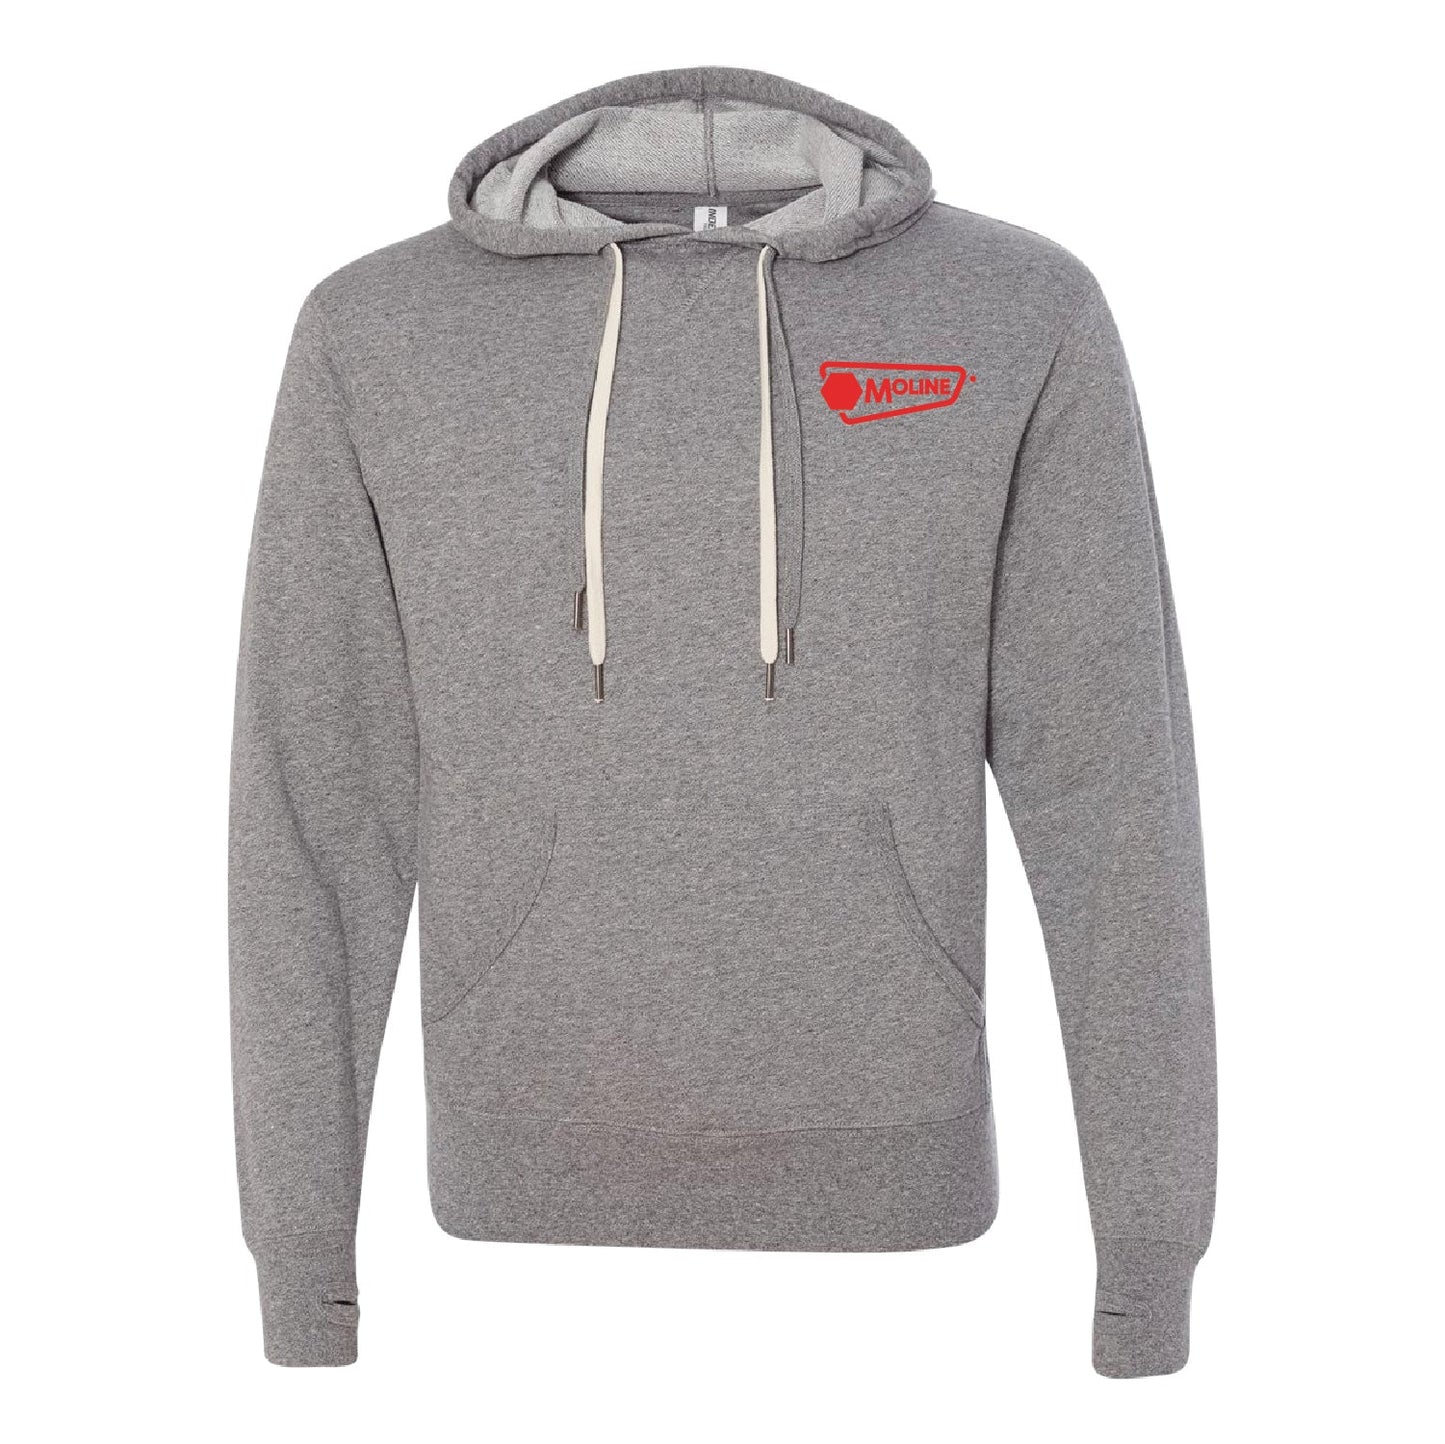 Moline Unisex Midweight French Terry Hooded Sweatshirt - DSP On Demand